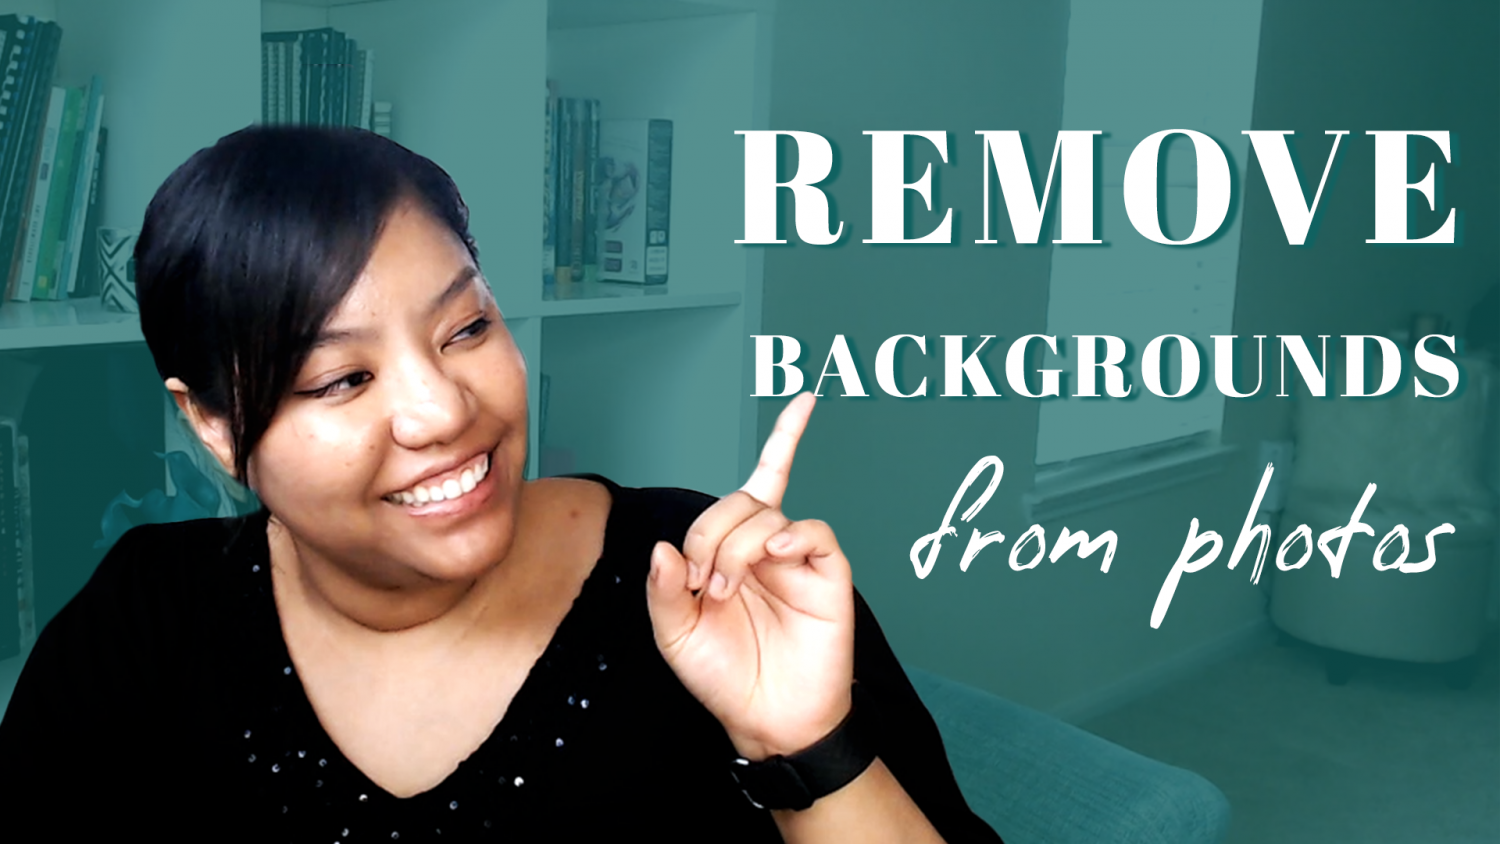 HOW TO REMOVE BACKGROUNDS FROM PHOTOS USING ADOBE PHOTOSHOP thumbnail